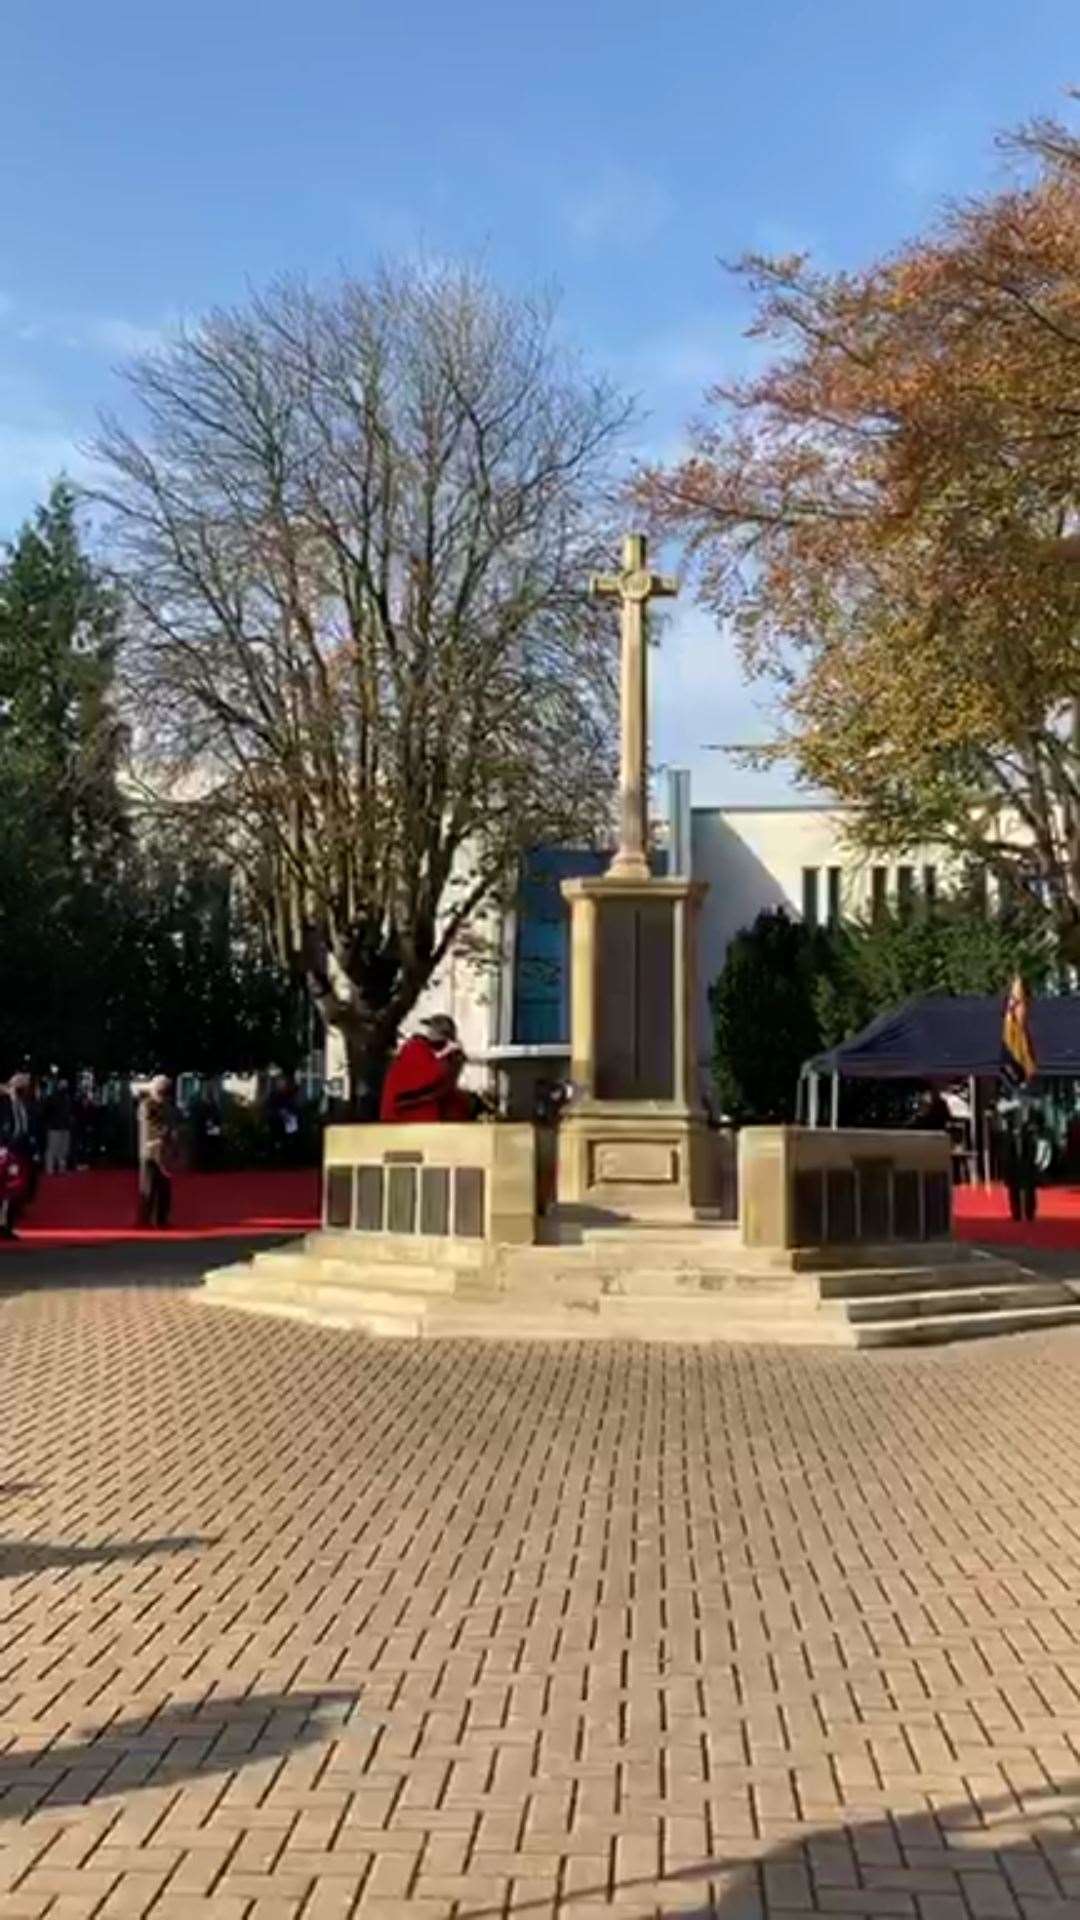 Ashford mayor Cllr John Link at the Garden of Remembrance which was closed to the public while the controlled service took place